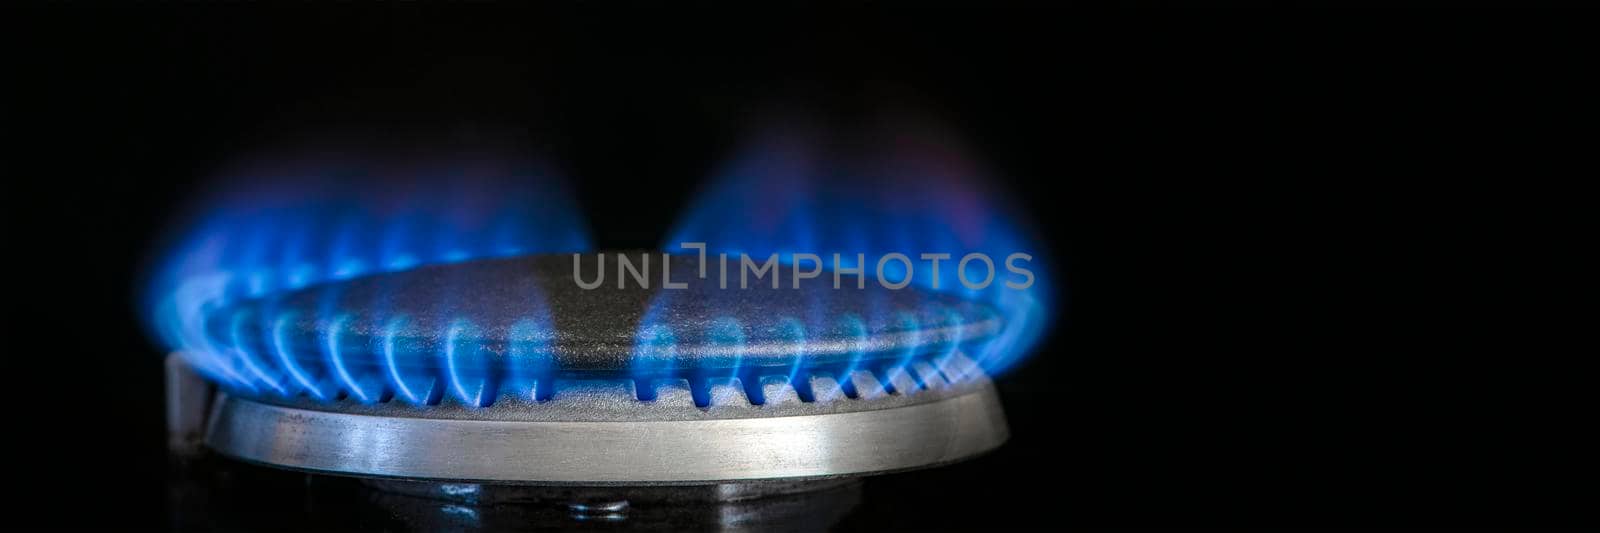 Combustion of natural gas, propane. Gas stove on a black background. Fragment of a gas kitchen stove with a blue flame, close-up. Energy crisis concept, rise in price or price of gas. by SERSOL